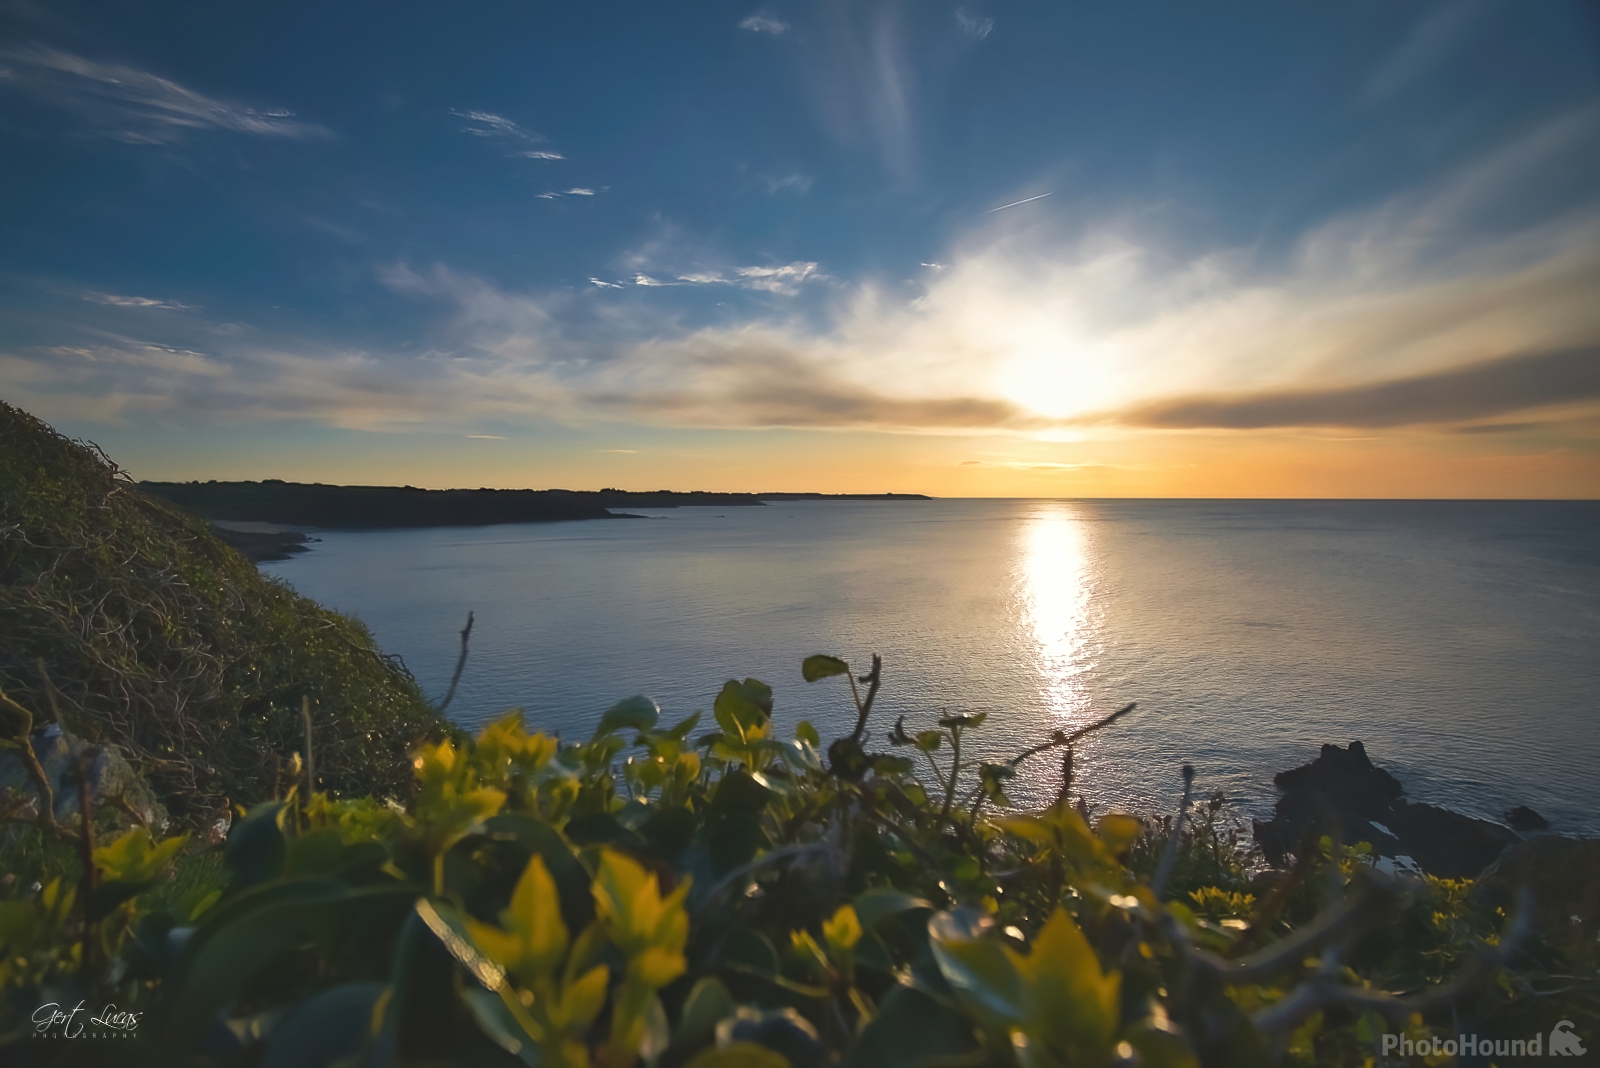 Image of Pointe du Grouin, Cancale, France - Sunset viewpoint by Gert Lucas